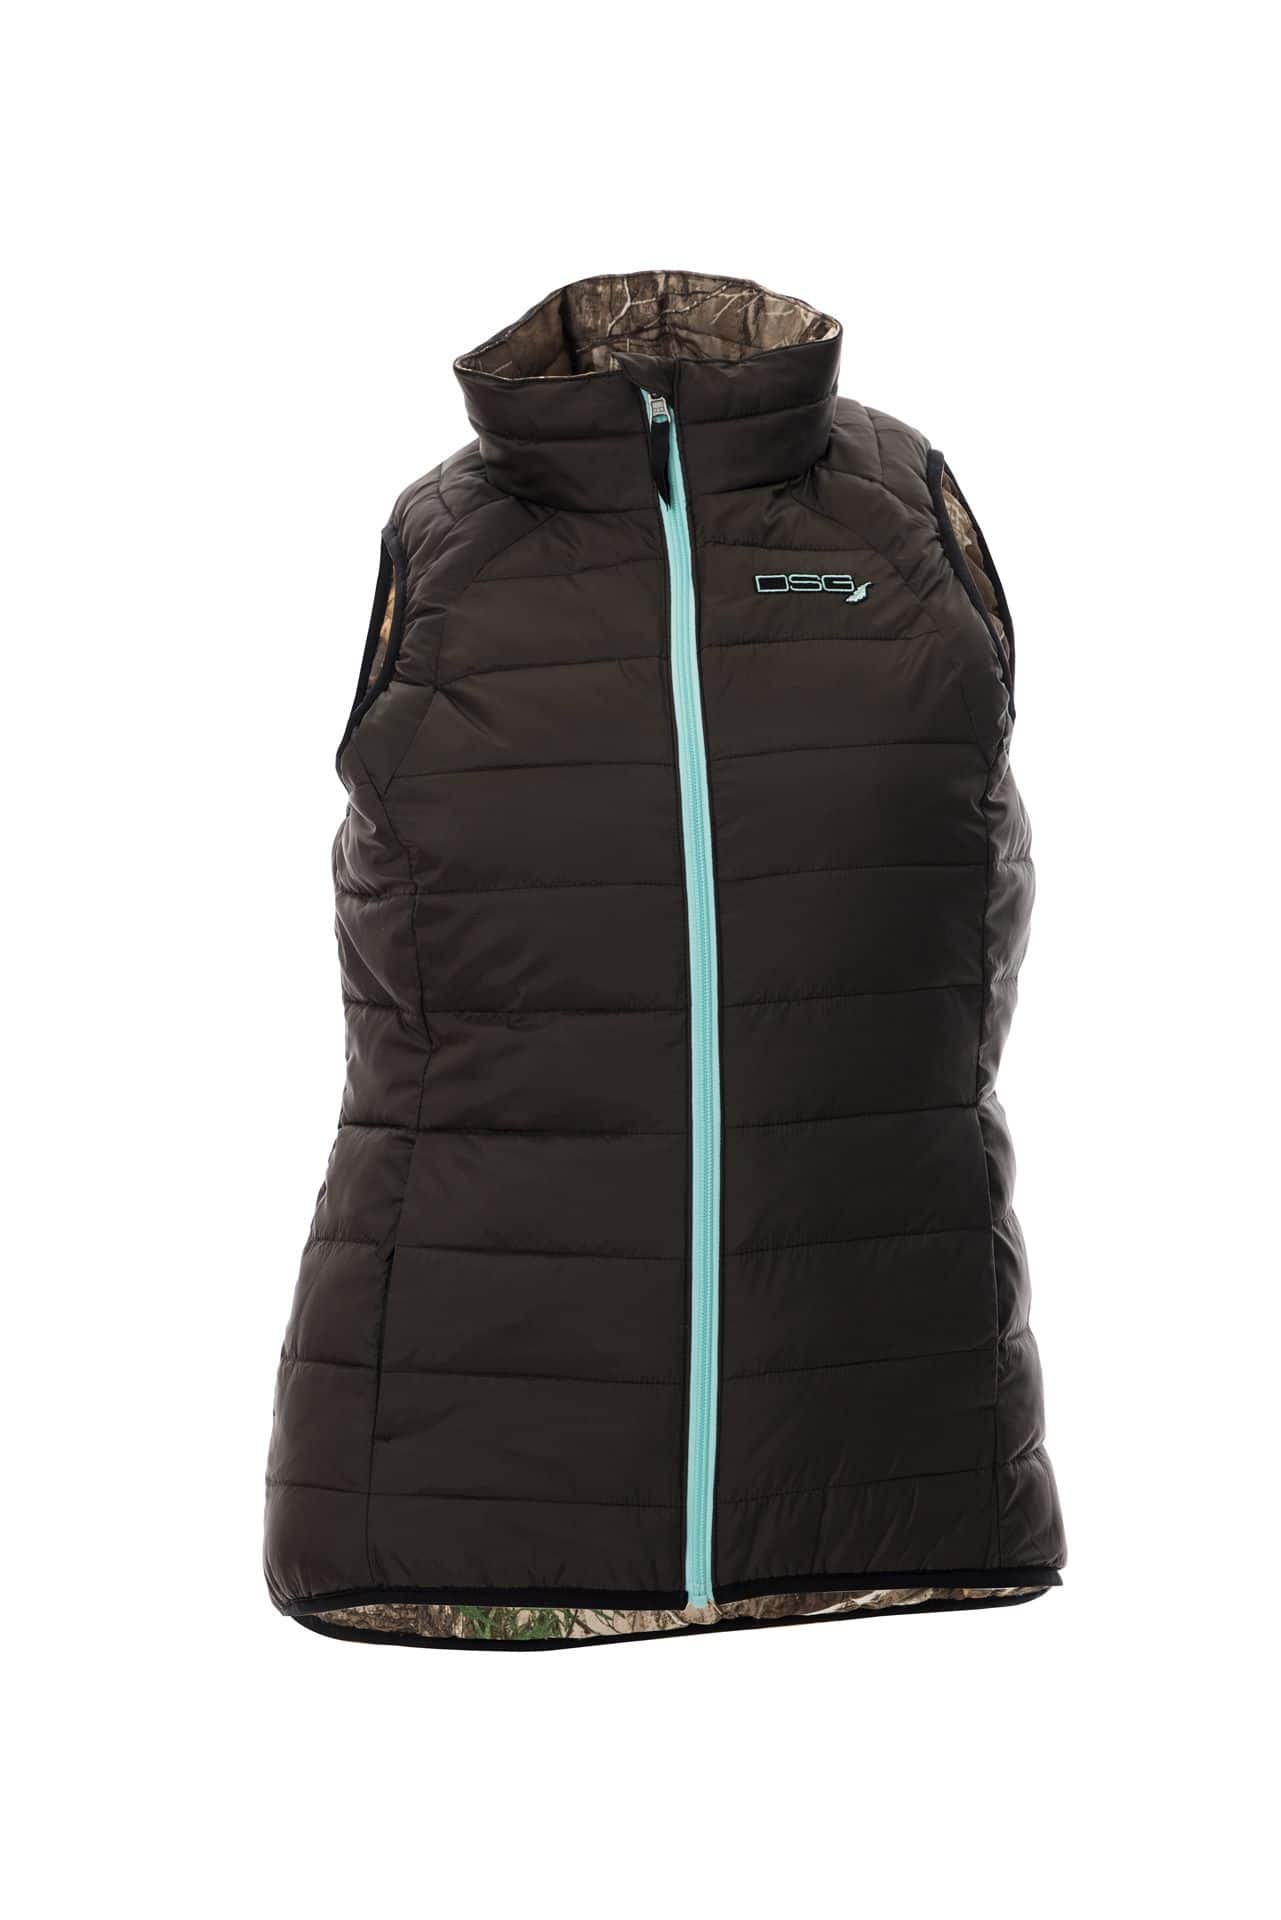 https://media-www.canadiantire.ca/product/playing/hunting/hunting-apparel-footwear/3750708/dsg-reversable-puffer-vest-s-2a86e5b3-3d80-4443-9106-79967ce26fbb-jpgrendition.jpg